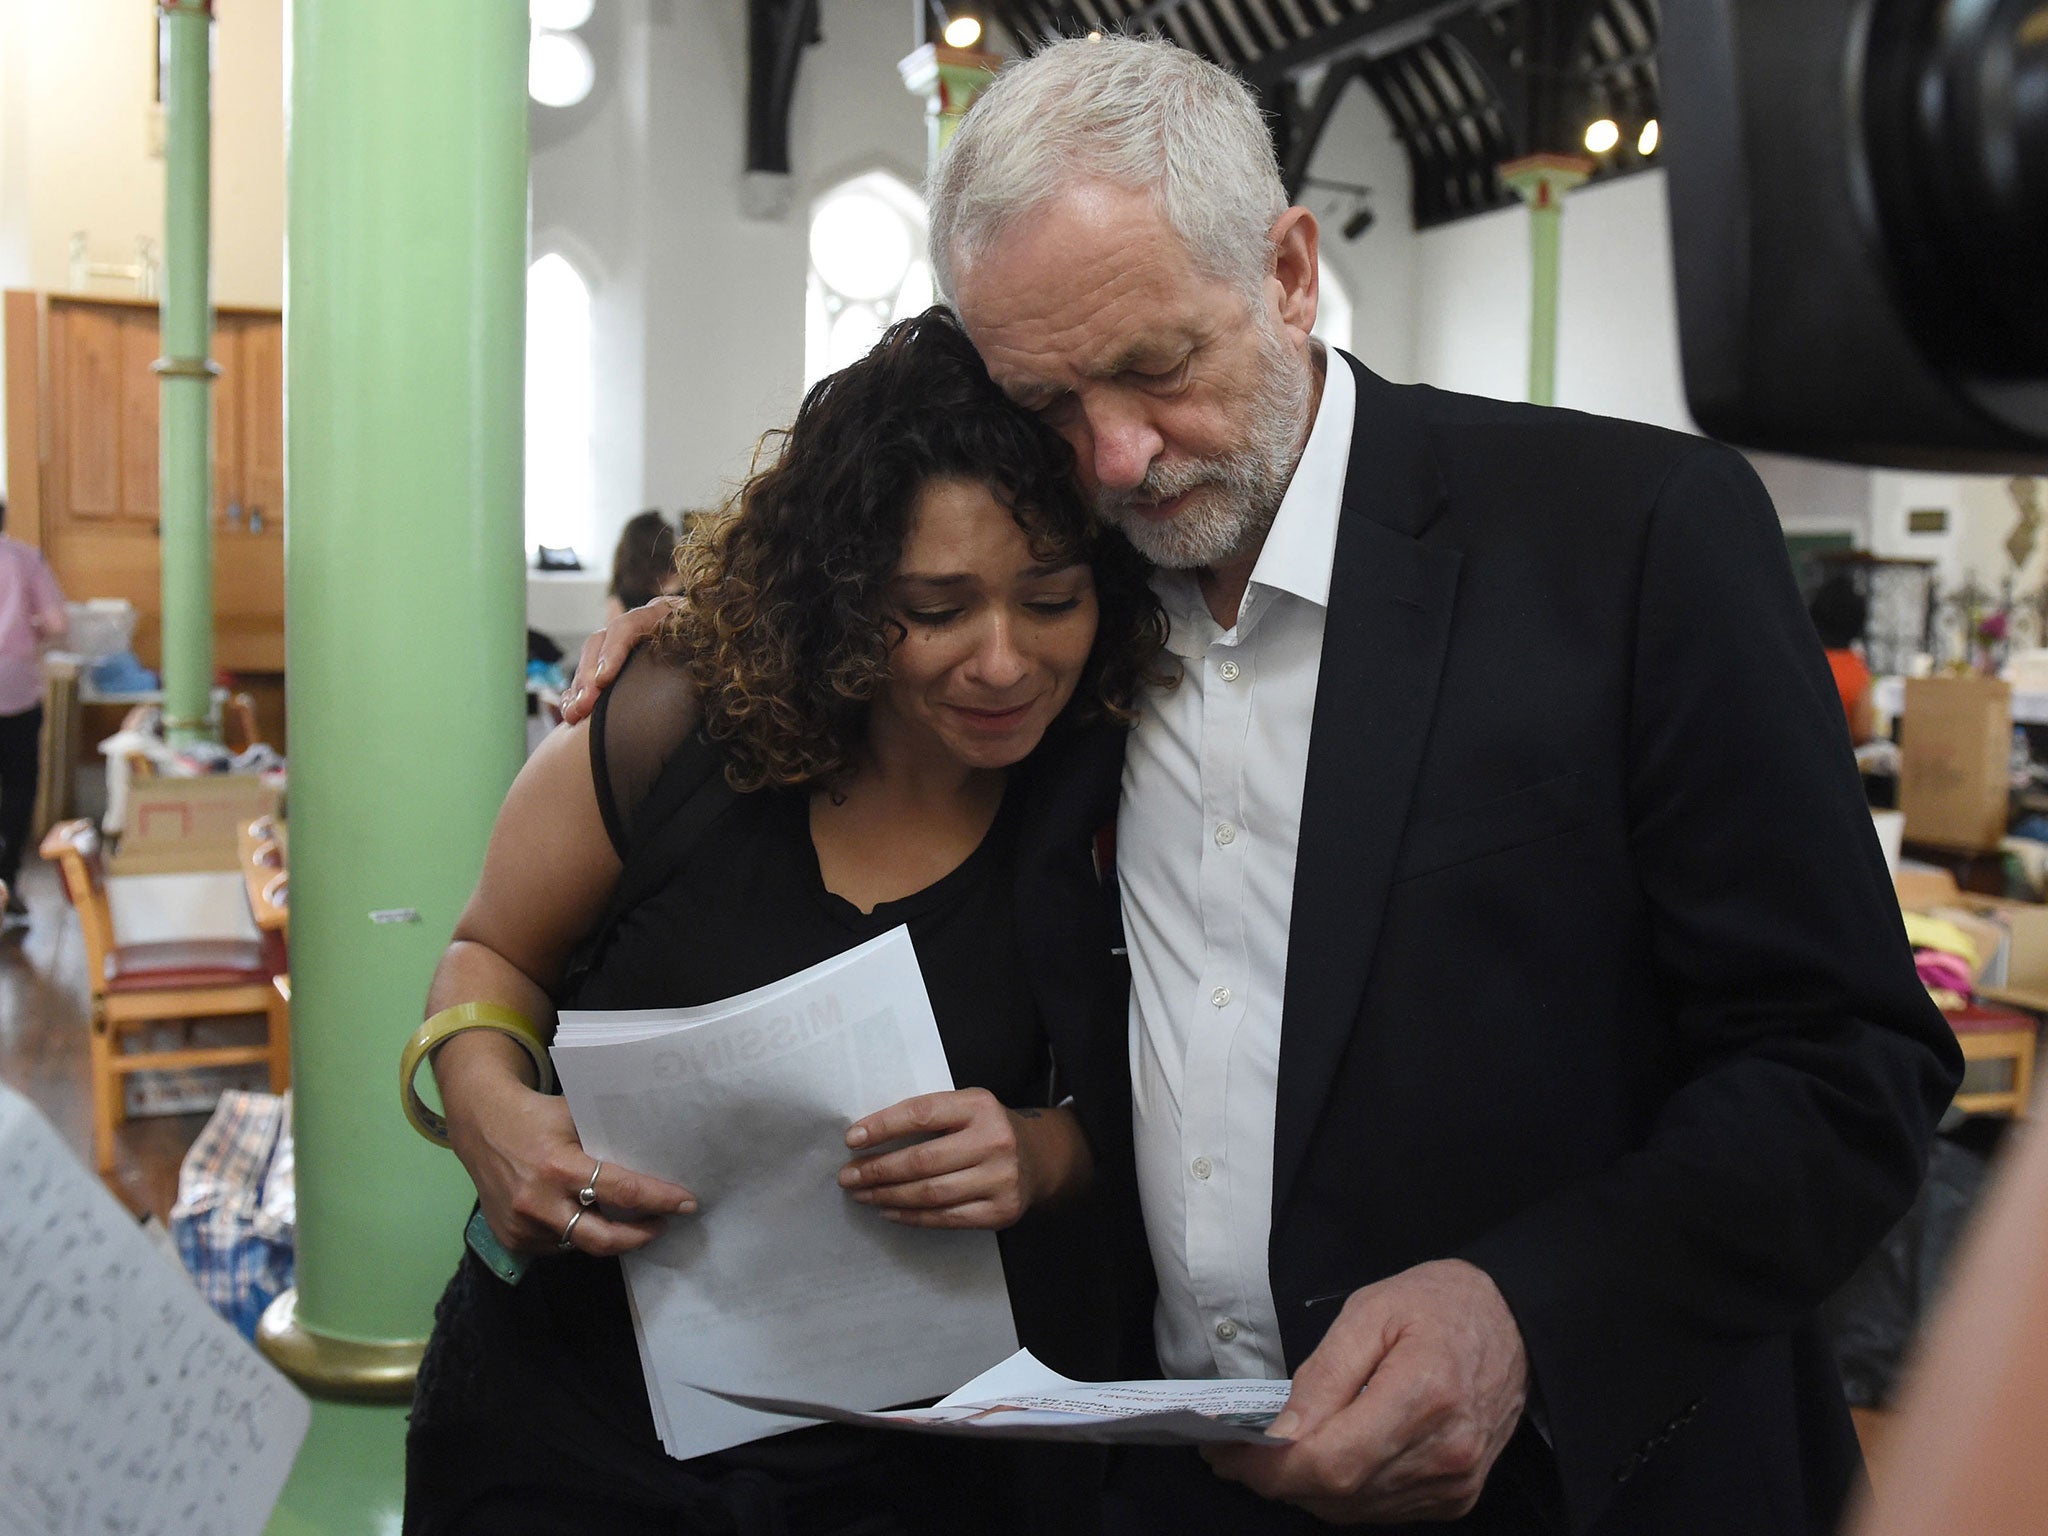 The Labour leader met with survivors in the immediate aftermath of the fire in June